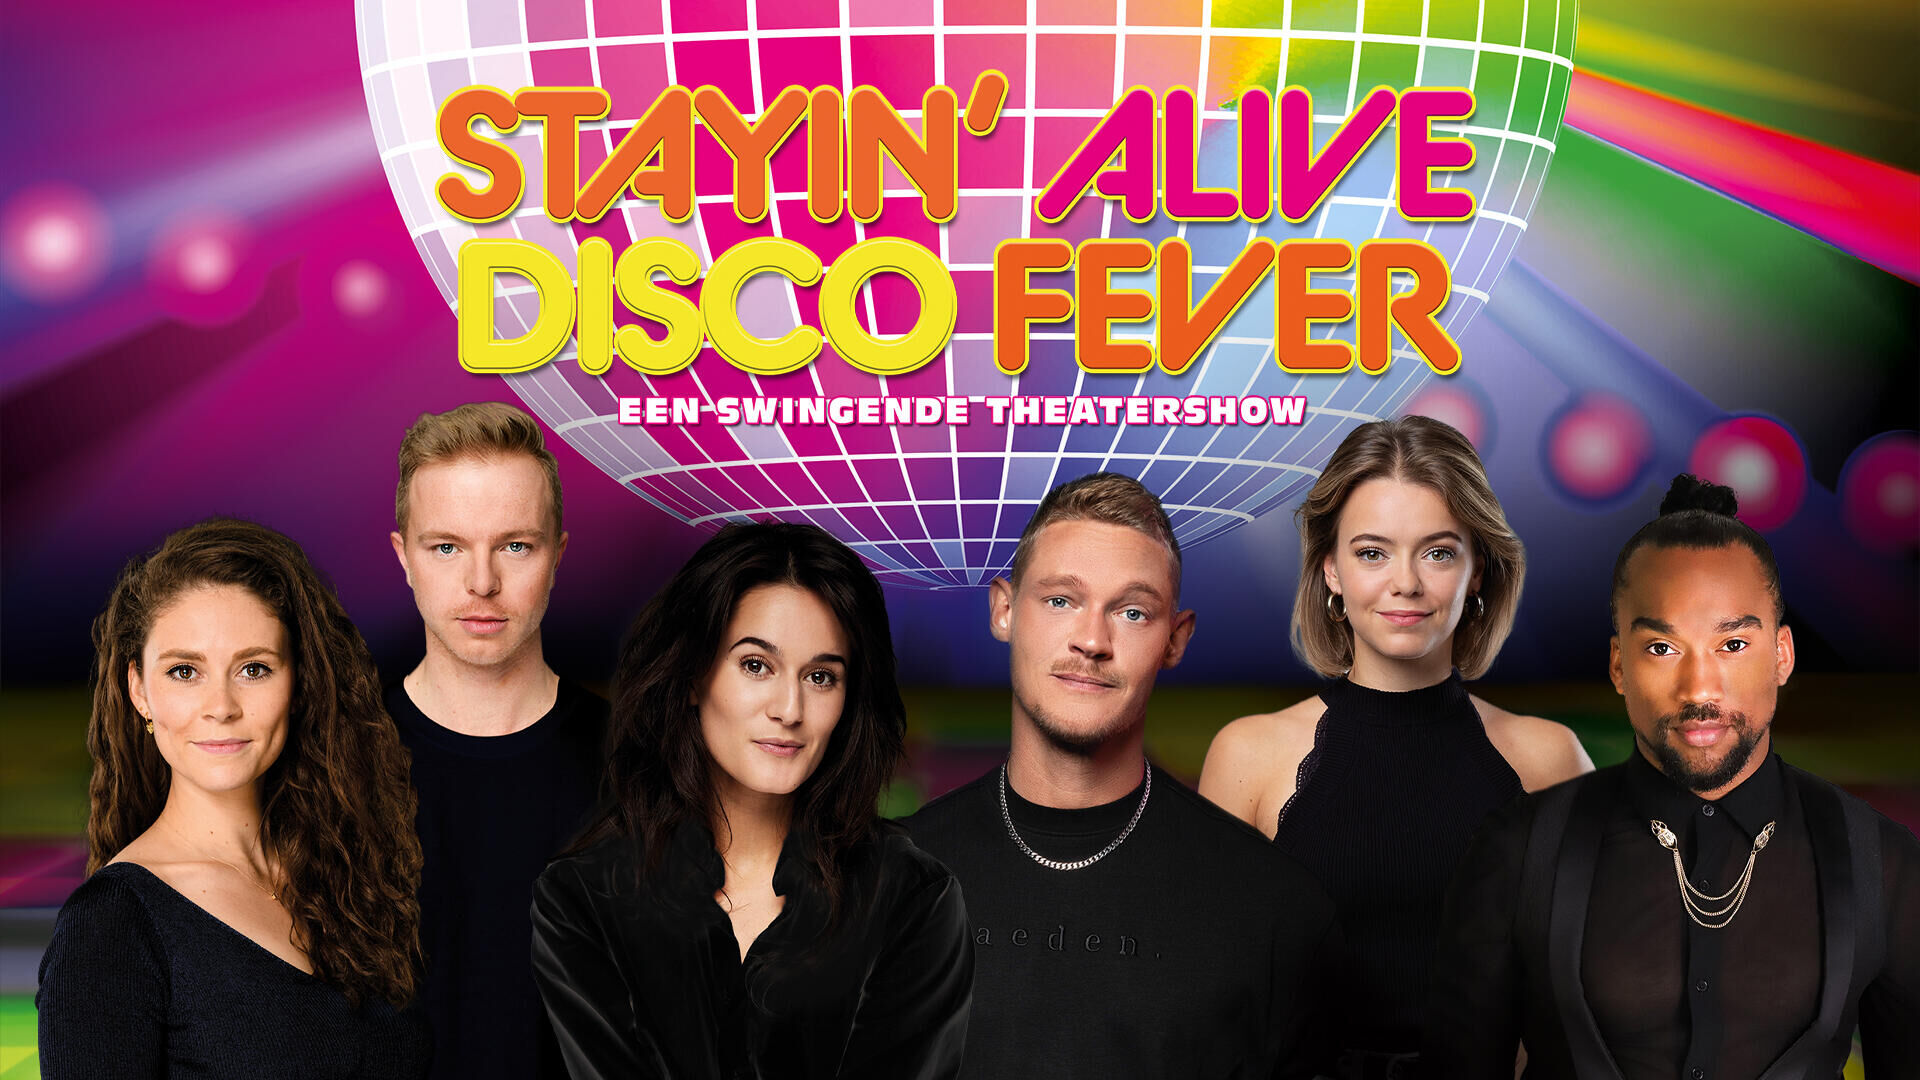 Stayin' Alive Disco Fever